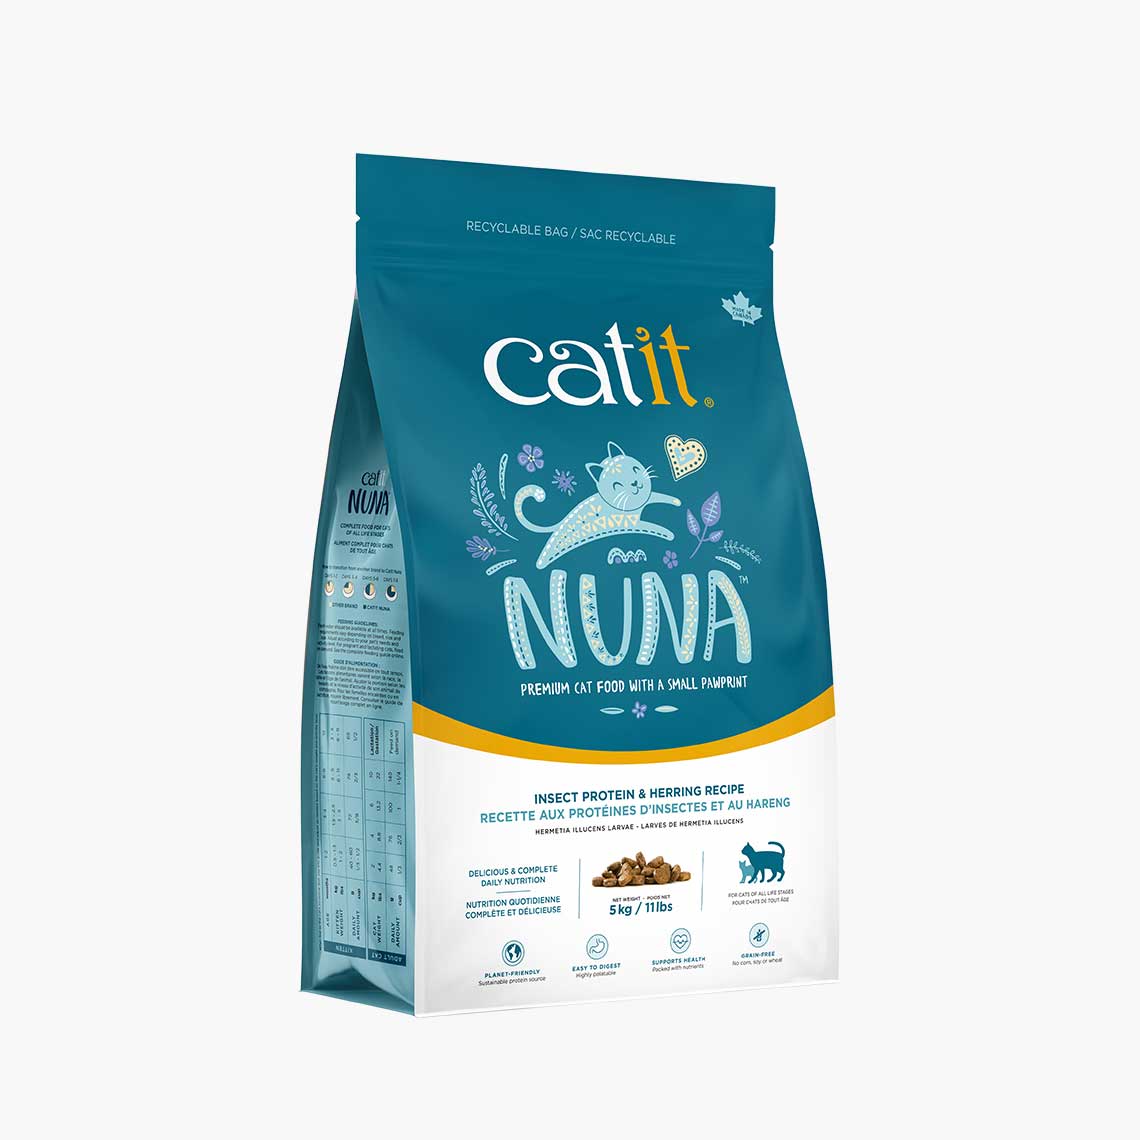 Catit Nuna – Insect Protein-Based Cat Food